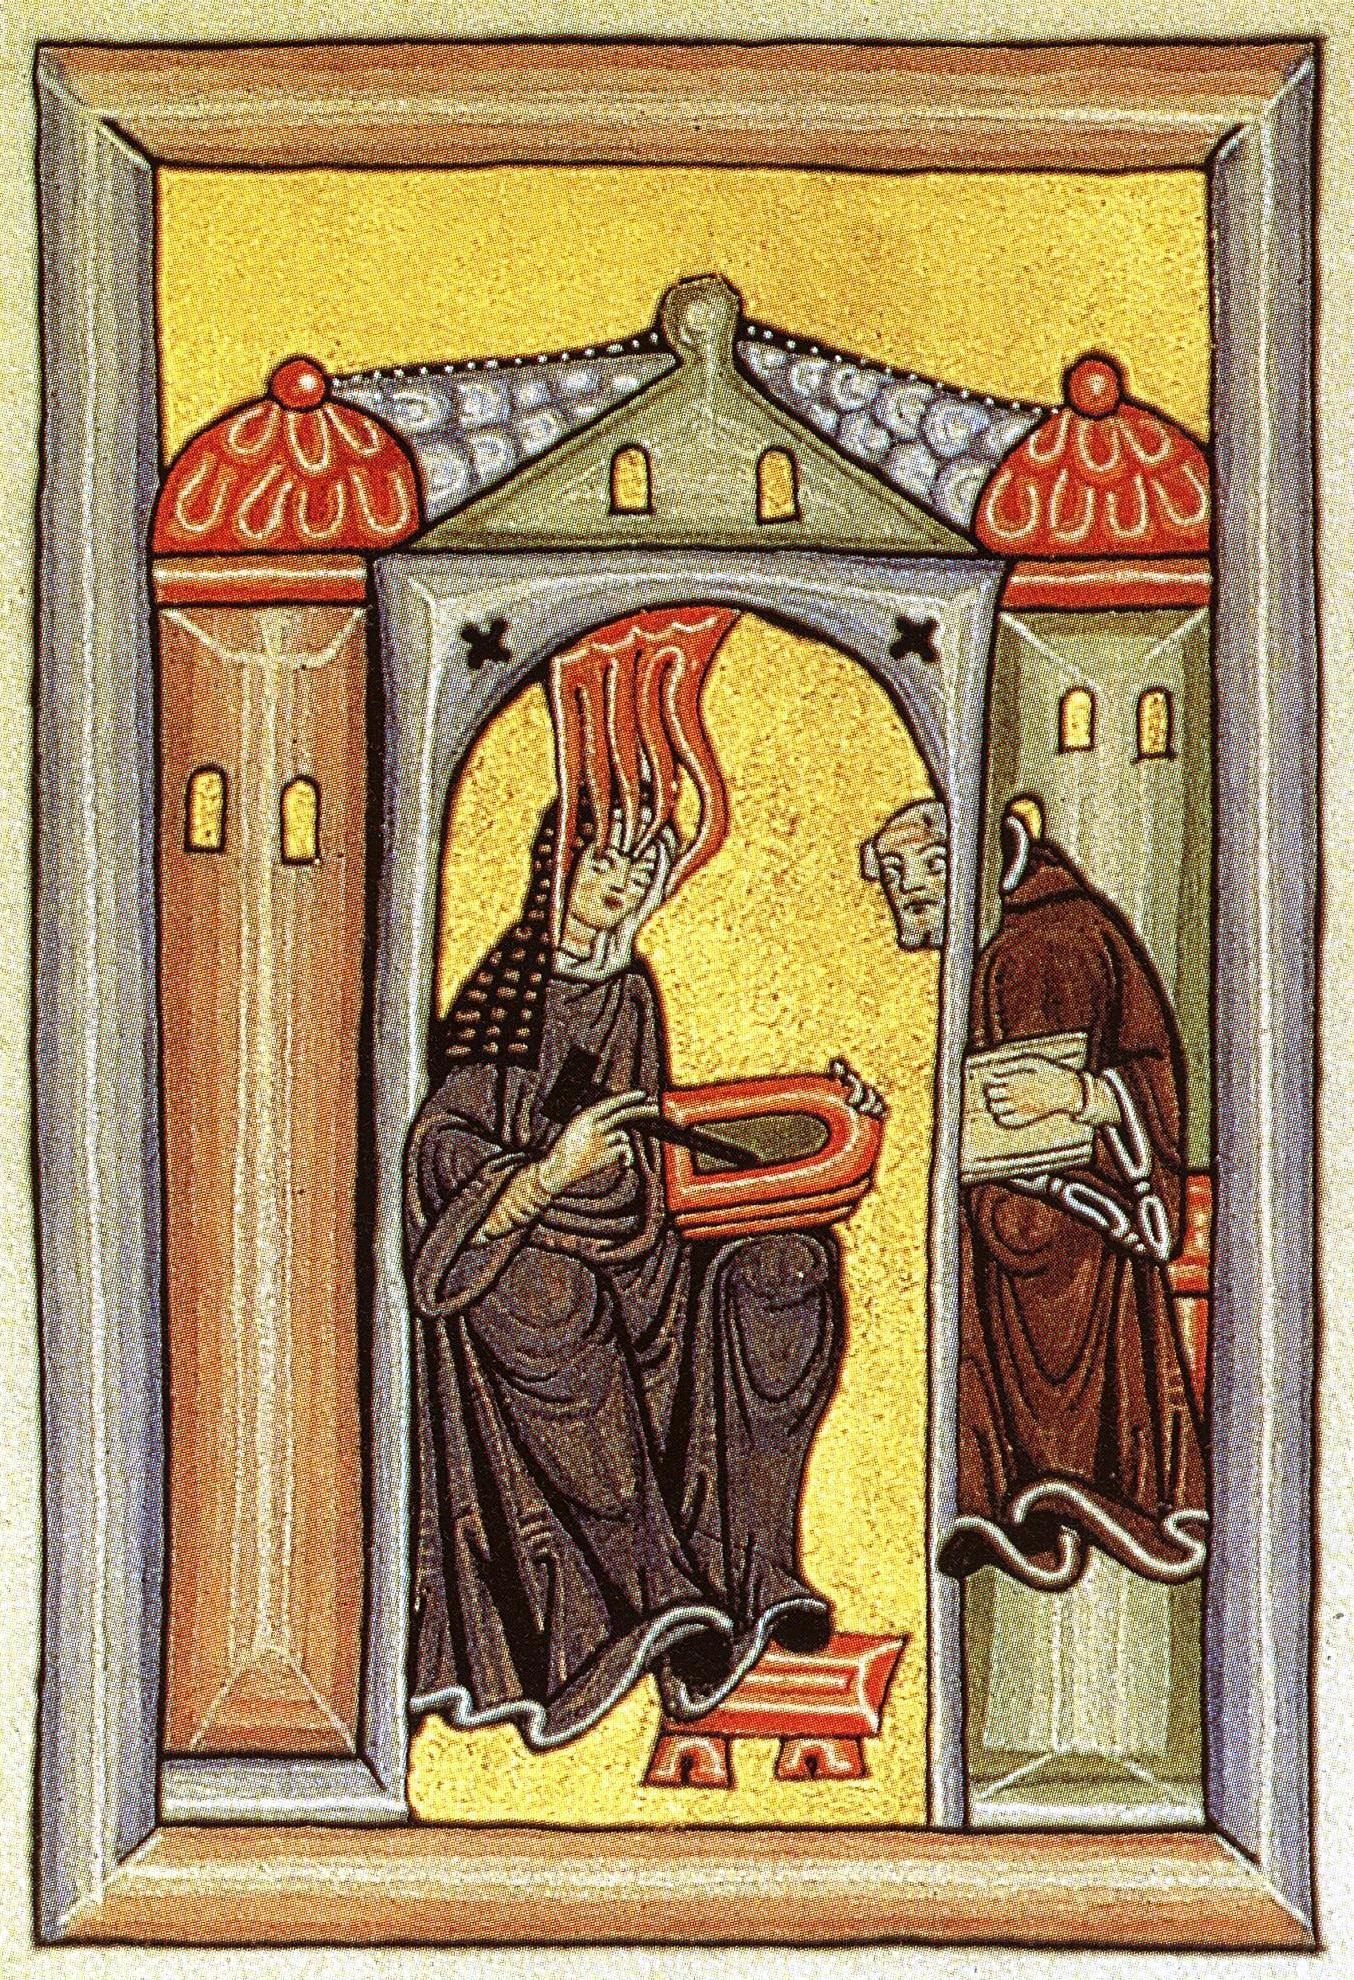 An illustration from one of Hildegard's visionary texts, depicting her receiving a vision and dictating to her scribe.